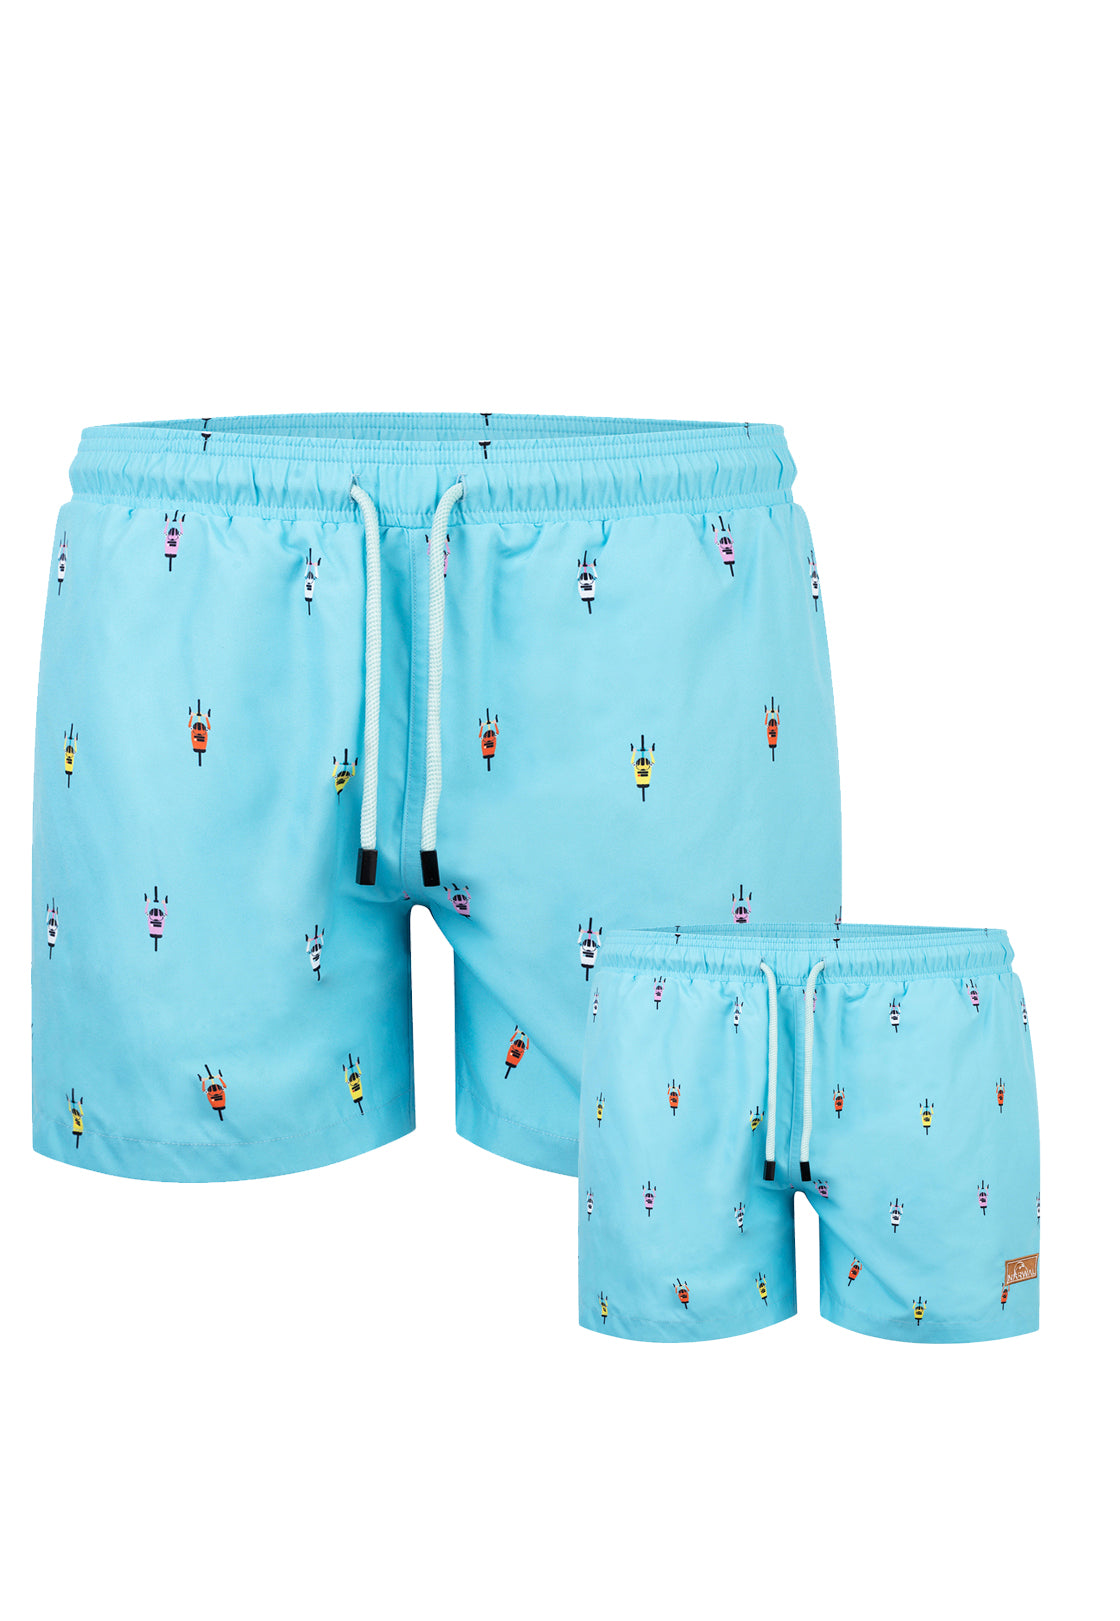 Cyclists Vader & Zoon Swim Trunks Bundle